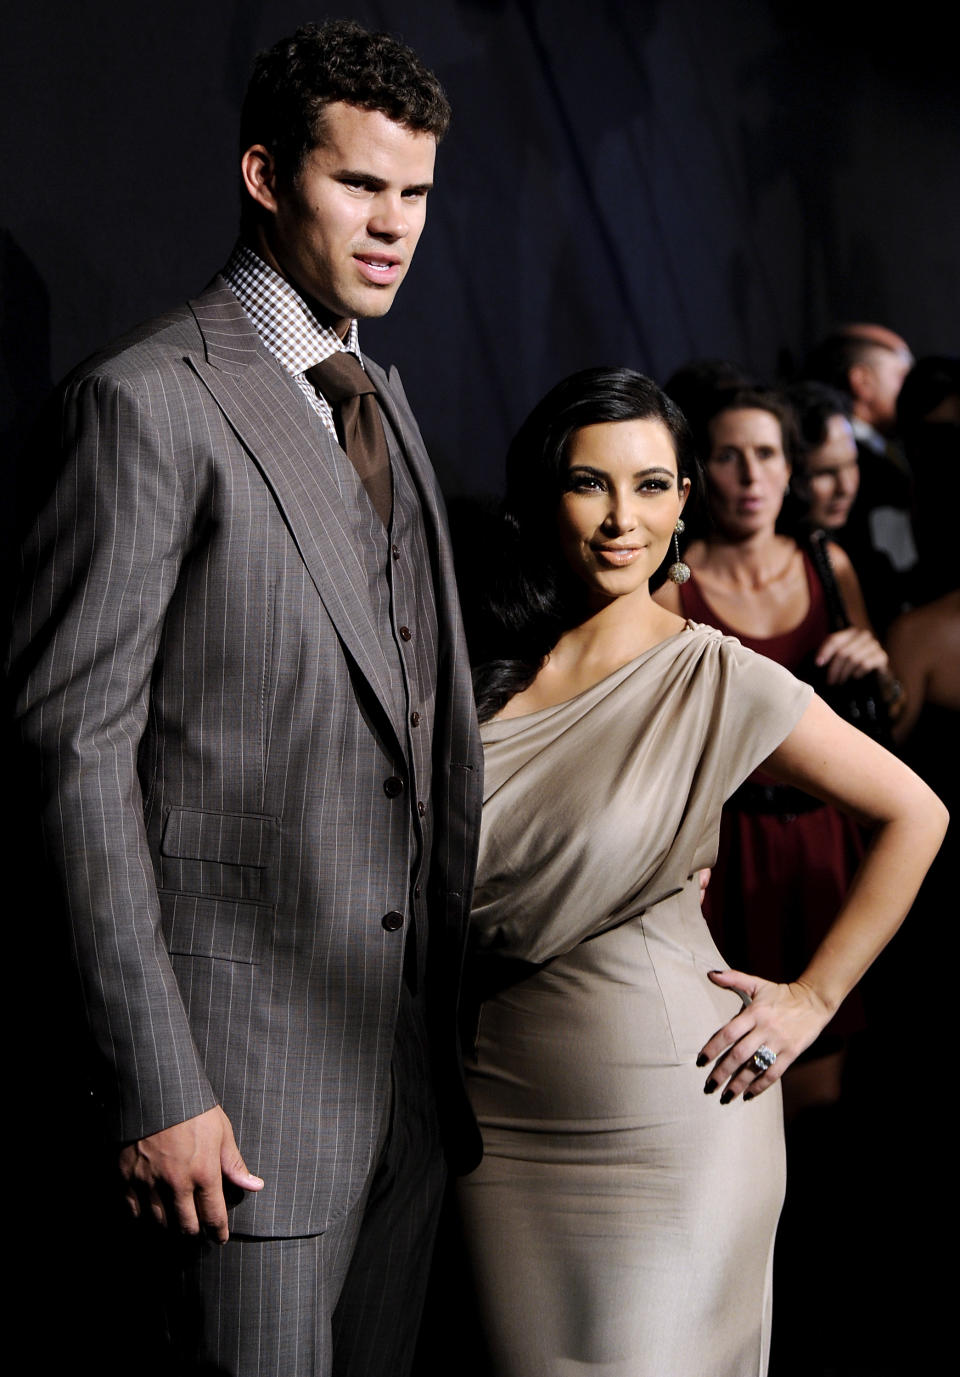 FILE - This Aug. 31, 2011 file photo shows Kim Kardashian and Kris Humphries attending a party thrown in their honor at Capitale in New York. The couple's divorce is unlikely to be concluded before the end of the year, with Humphries' attorneys seeking detailed records from companies that handle the reality starlet's shows and the depositions of her mother-manager Kris Jenner and current boyfriend Kanye West. Kardashian, 31, and Humphries, 26, were wed Aug. 20 in a star-studded, black-tie ceremony at an exclusive estate in California. (AP Photo/Evan Agostini, file)